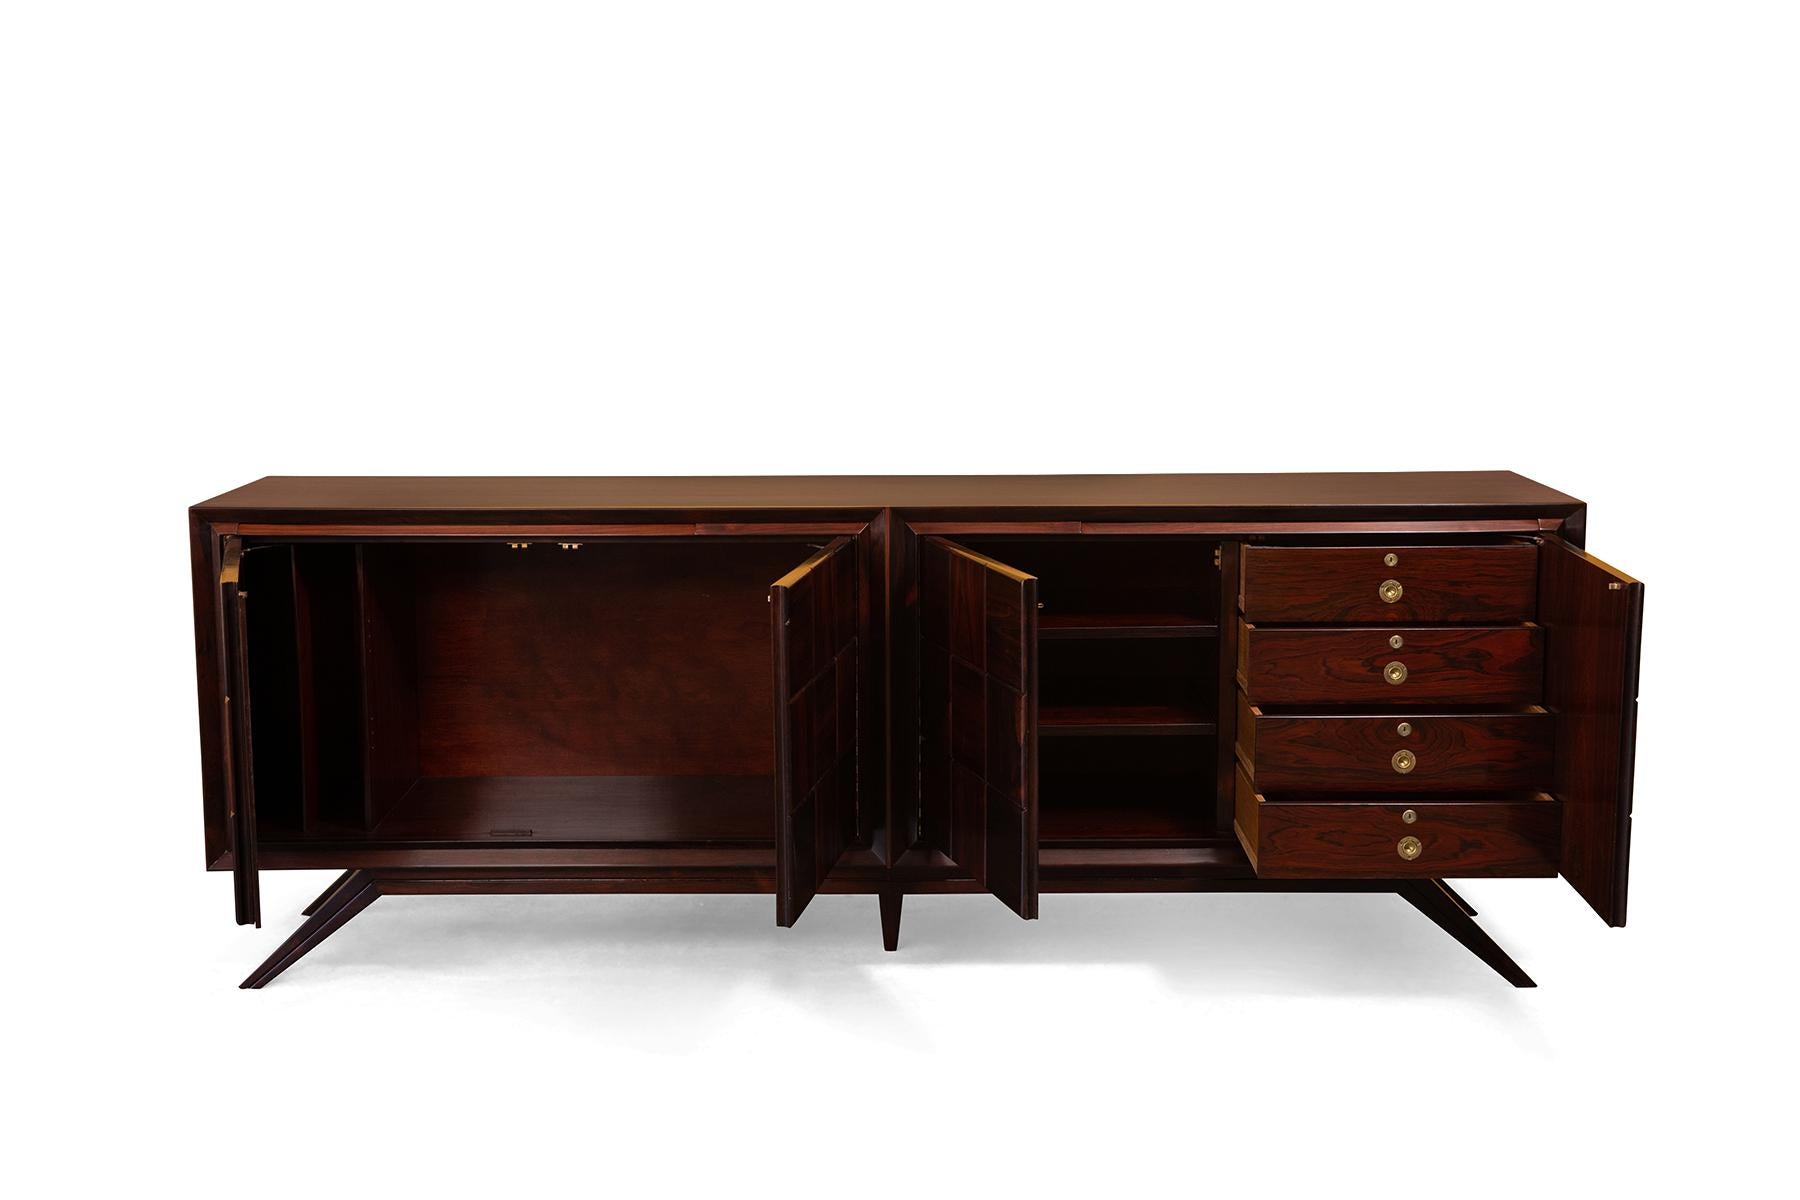 Solid rosewood credenza, circa early 1960s. This monumental example has solid patchwork rosewood on the doors and incredibly sculptural splayed legs. Interior has a combination of drawers and shelves. Because of the materials it is quite heavy so